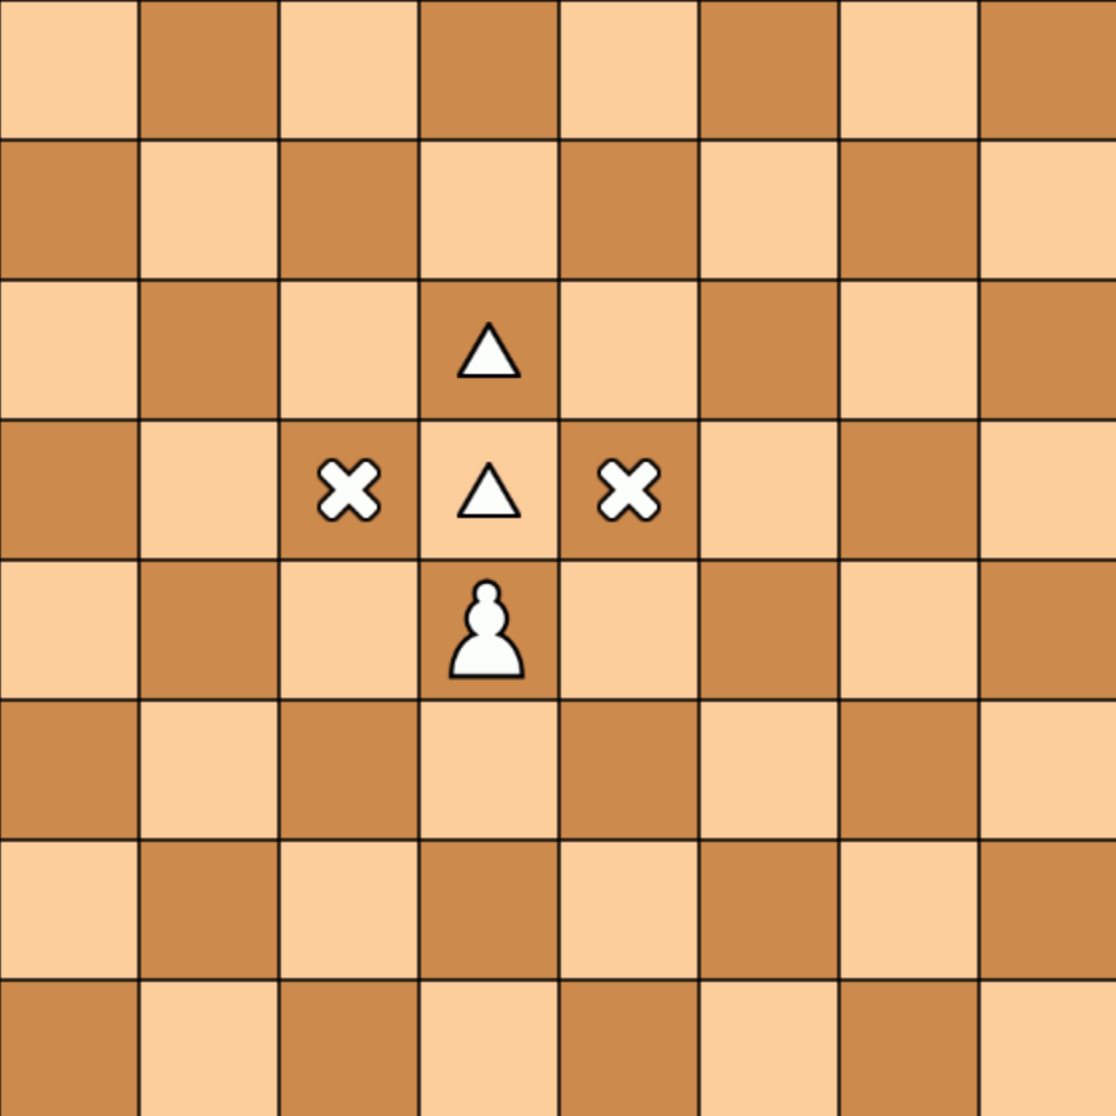 Moves of the Pawn